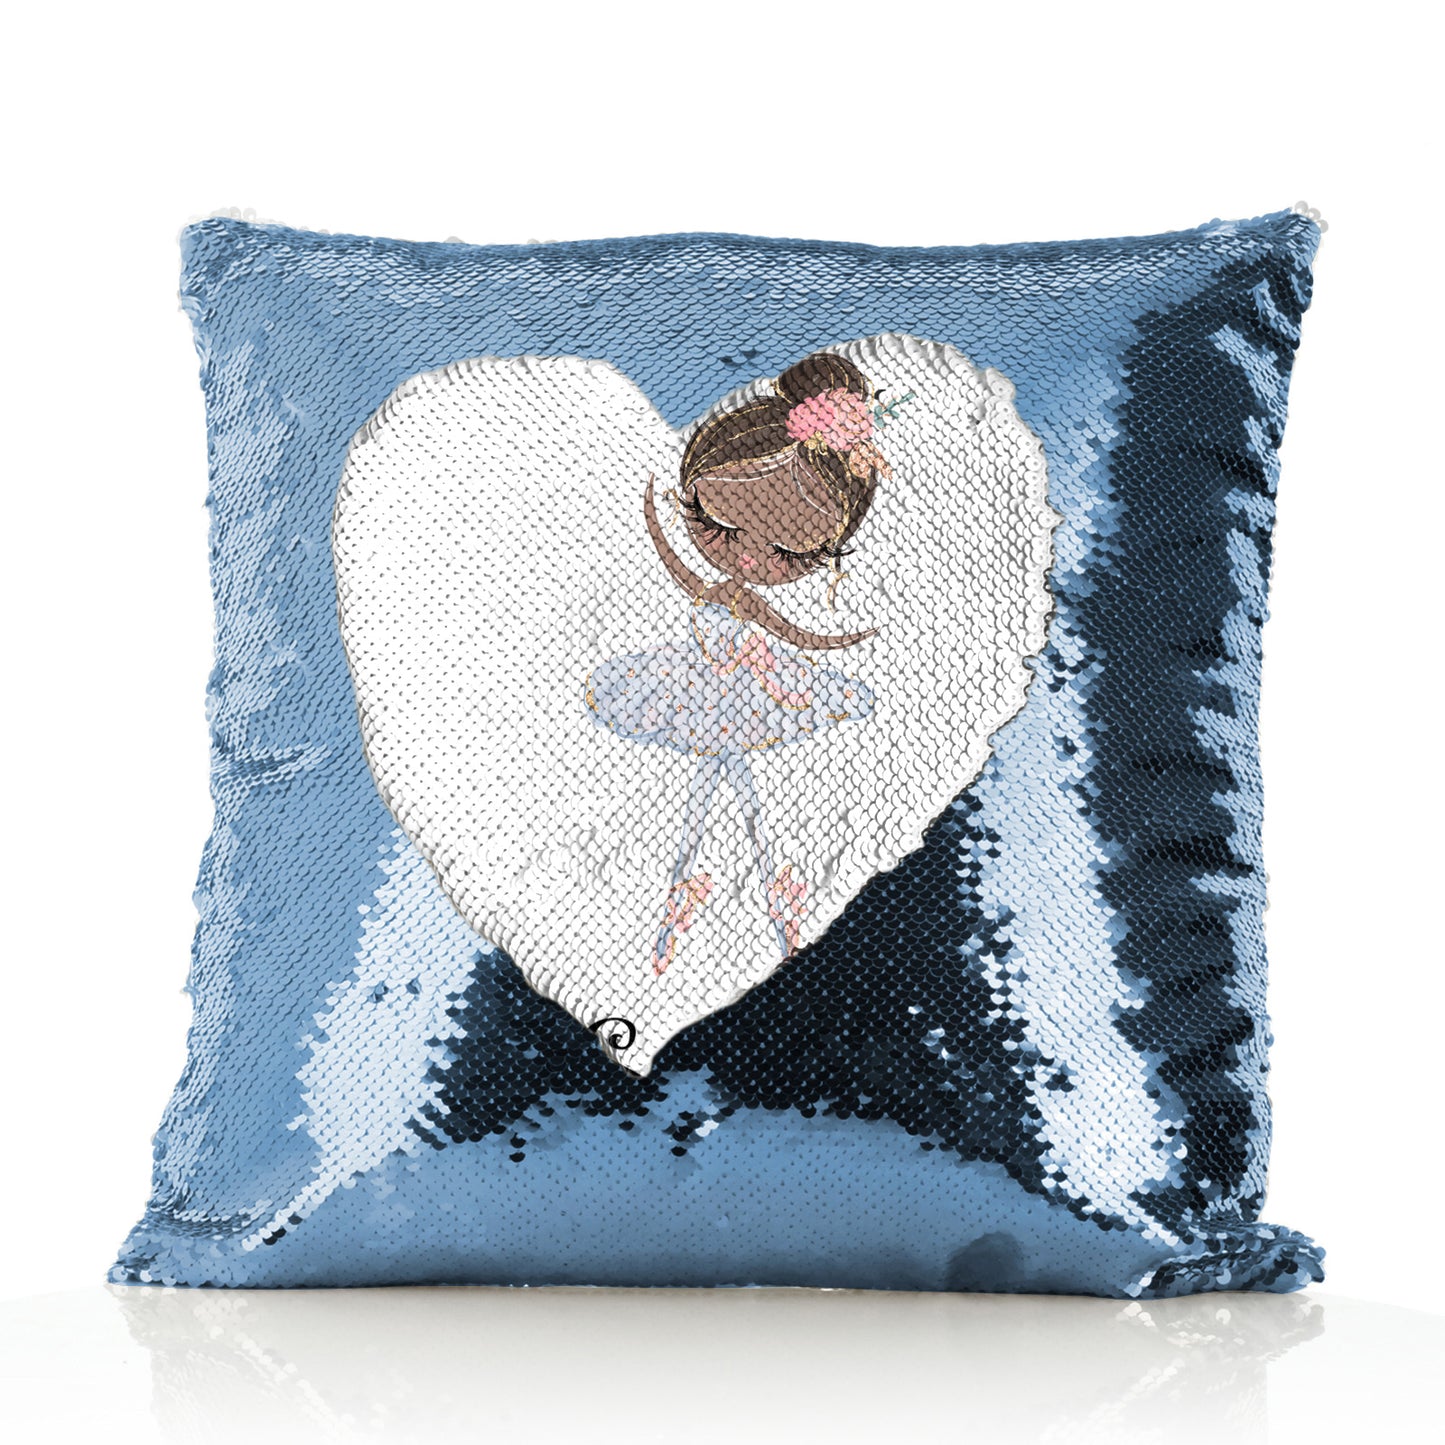 Personalised Sequin Cushion with Cute Text and Black Hair White Dress Ballerina